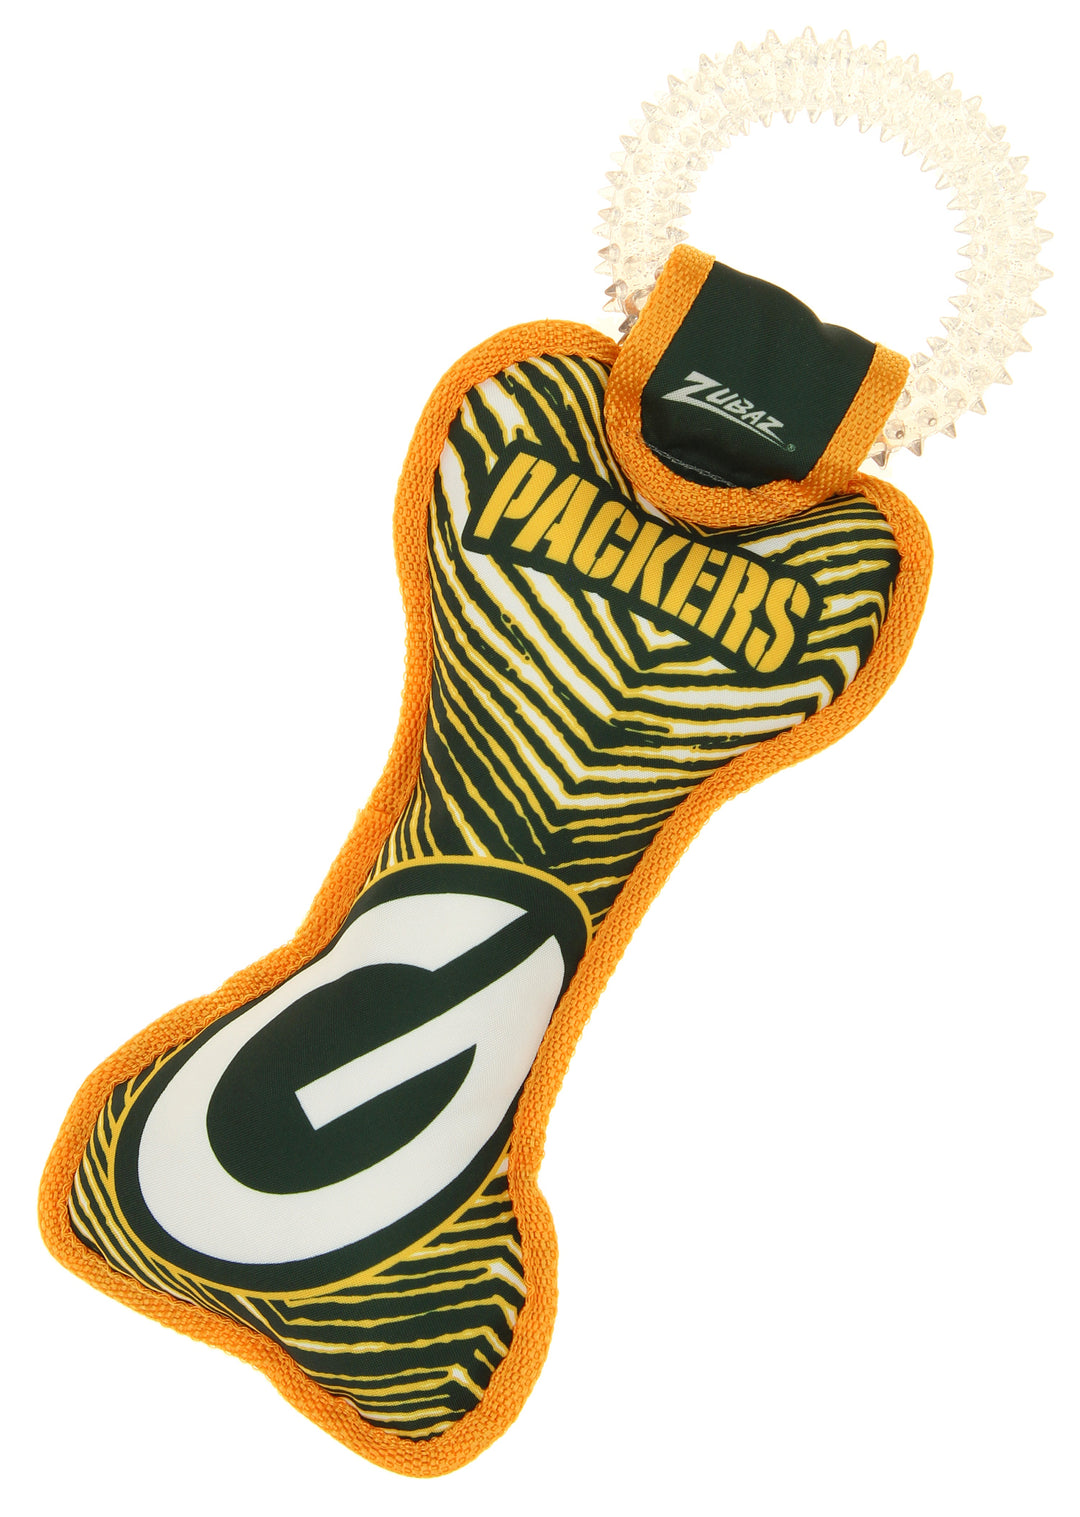 Zubaz X Pets First NFL Green Bay Packers Team Ring Tug Toy for Dogs